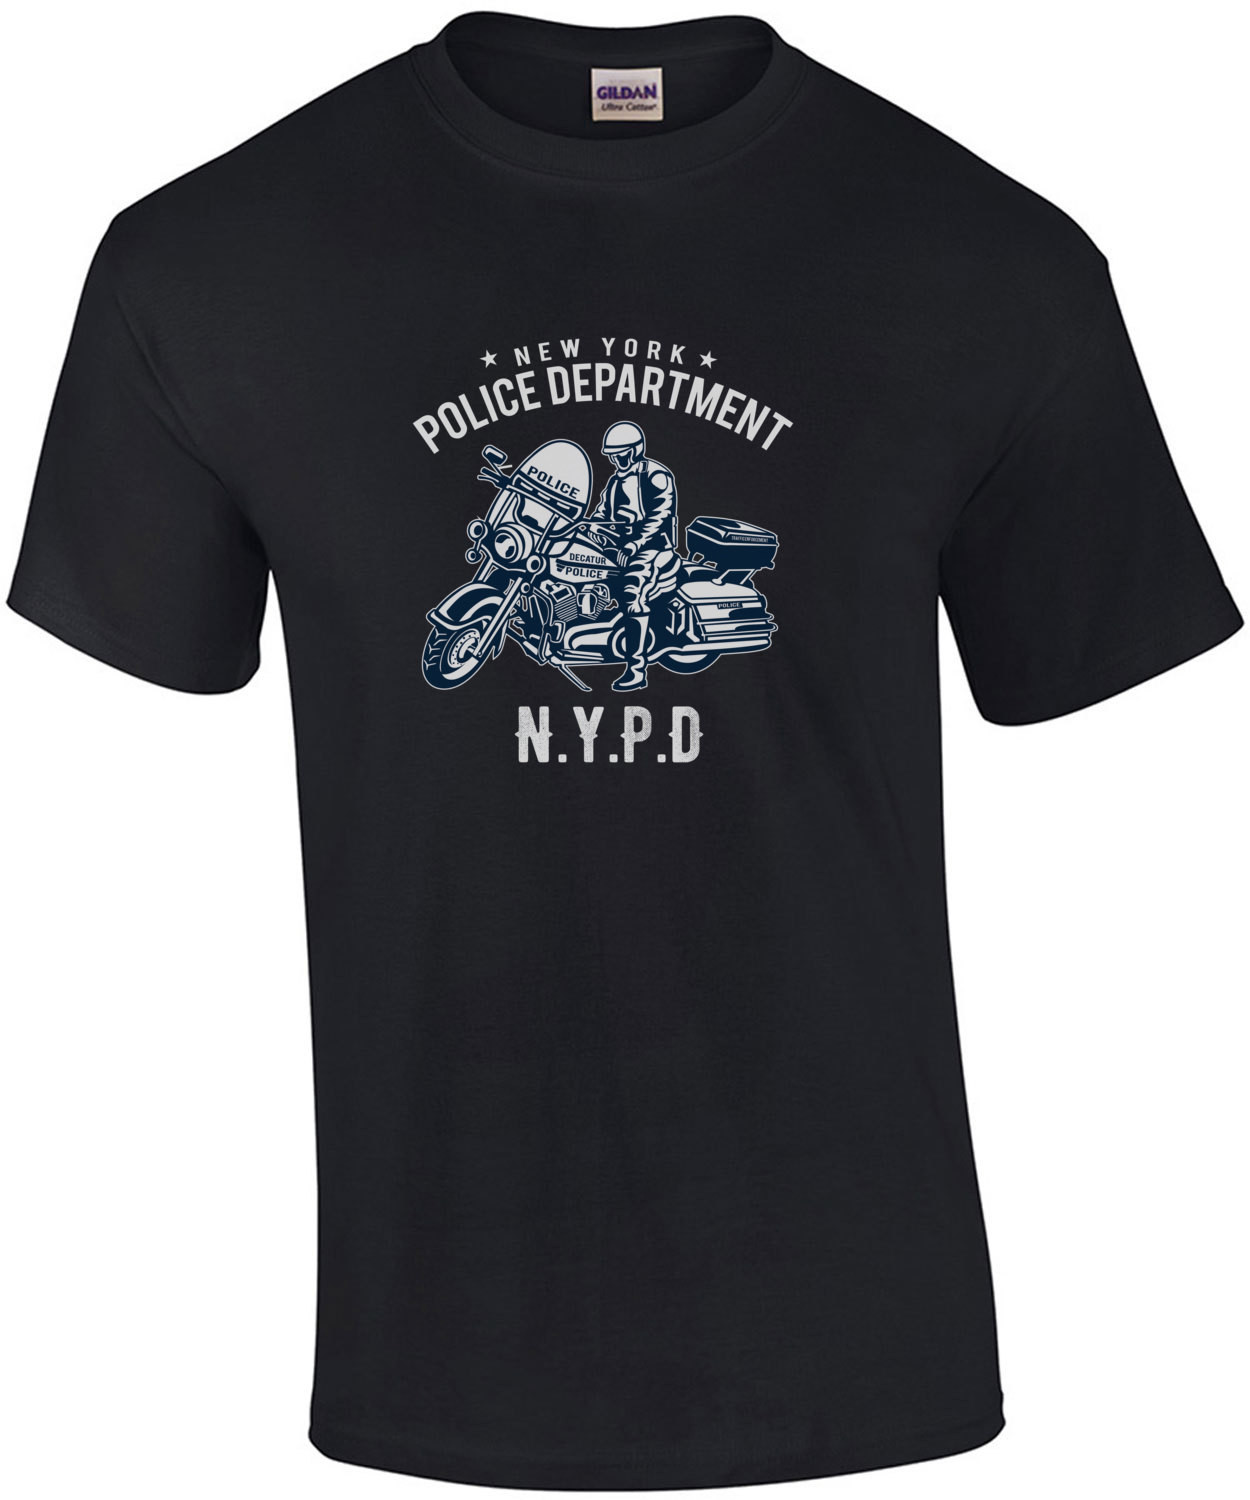 New York Police Department Nypd Motorcycle T-Shirt